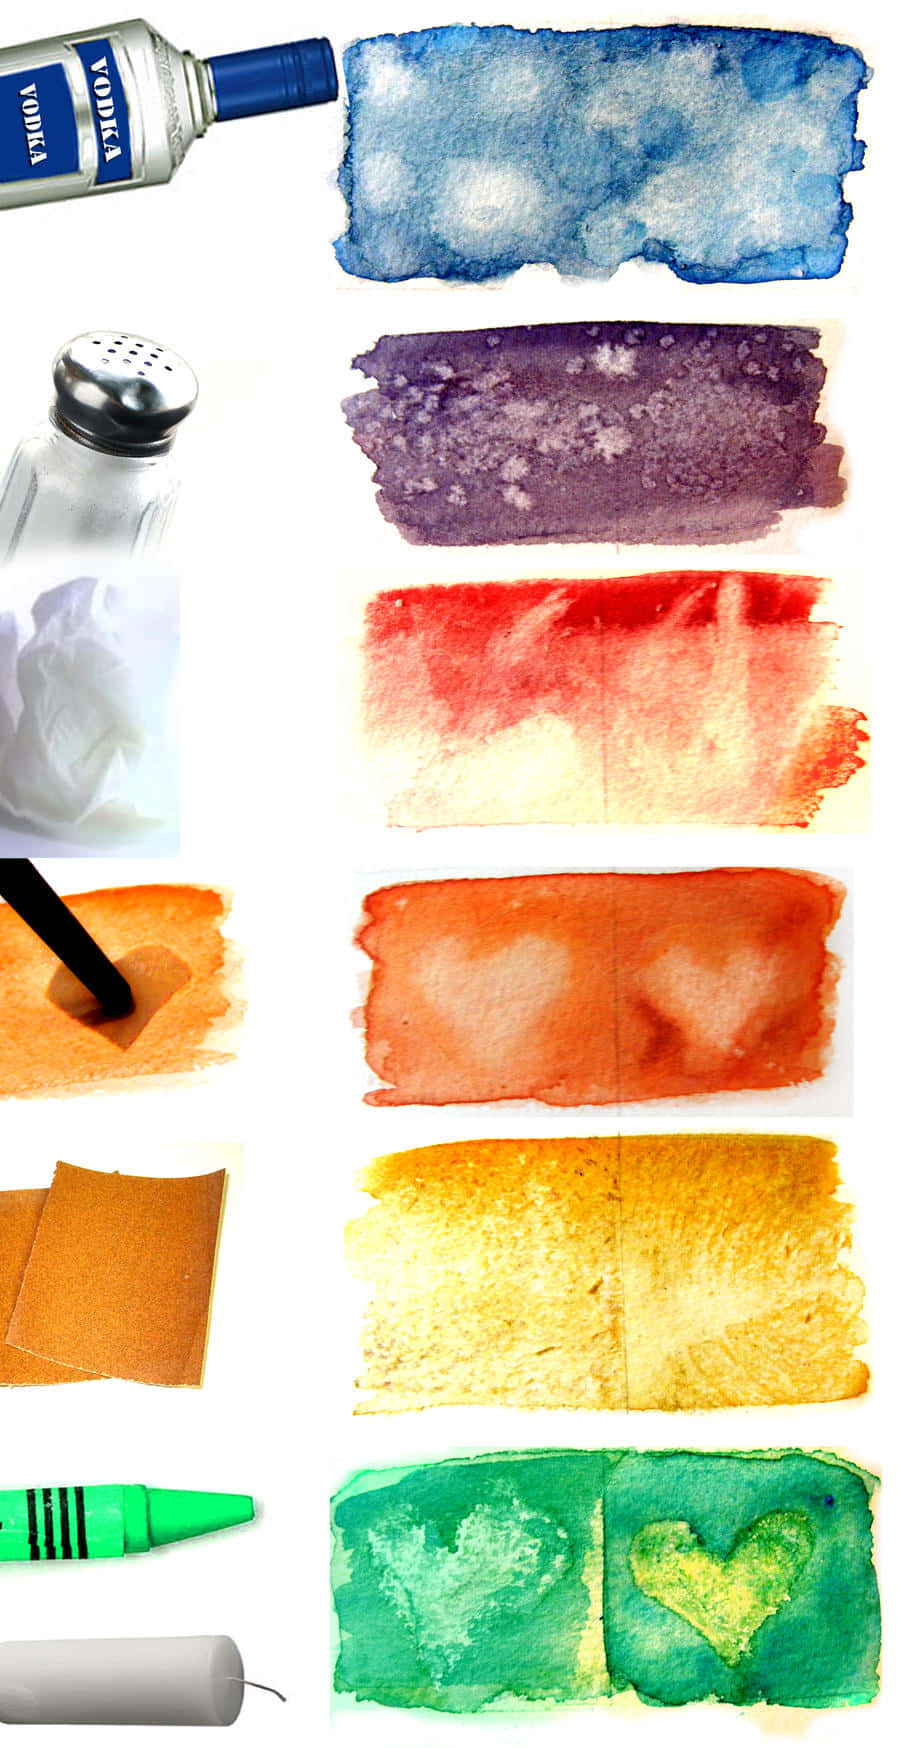 Abstract Watercolor Textures